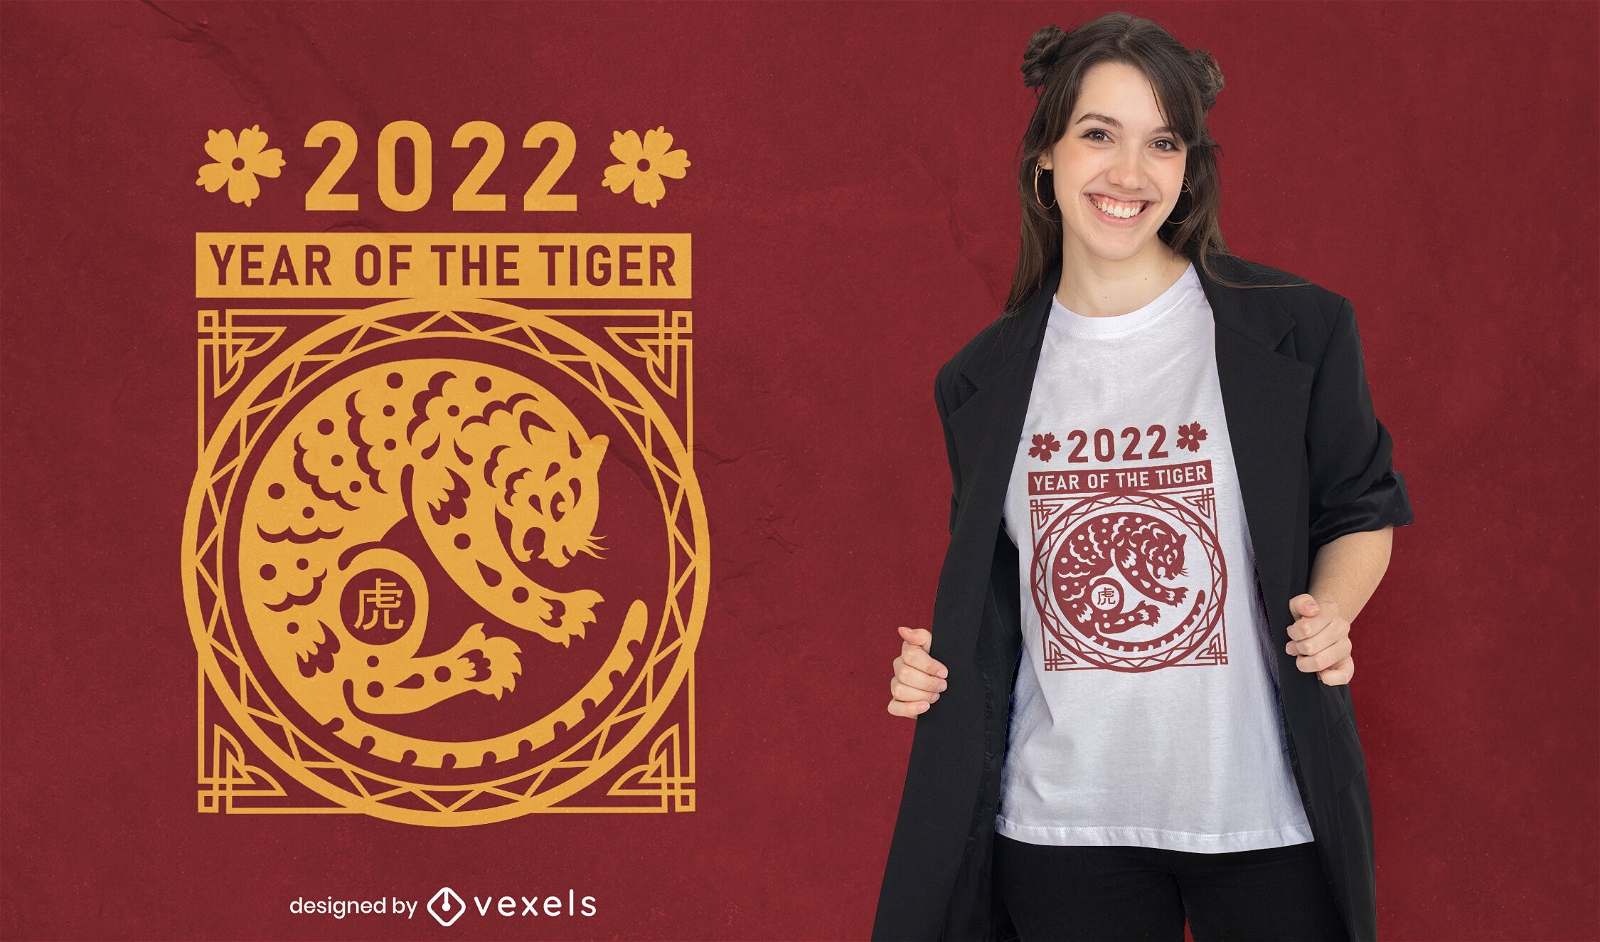 Year of the tiger 2022 t-shirt design